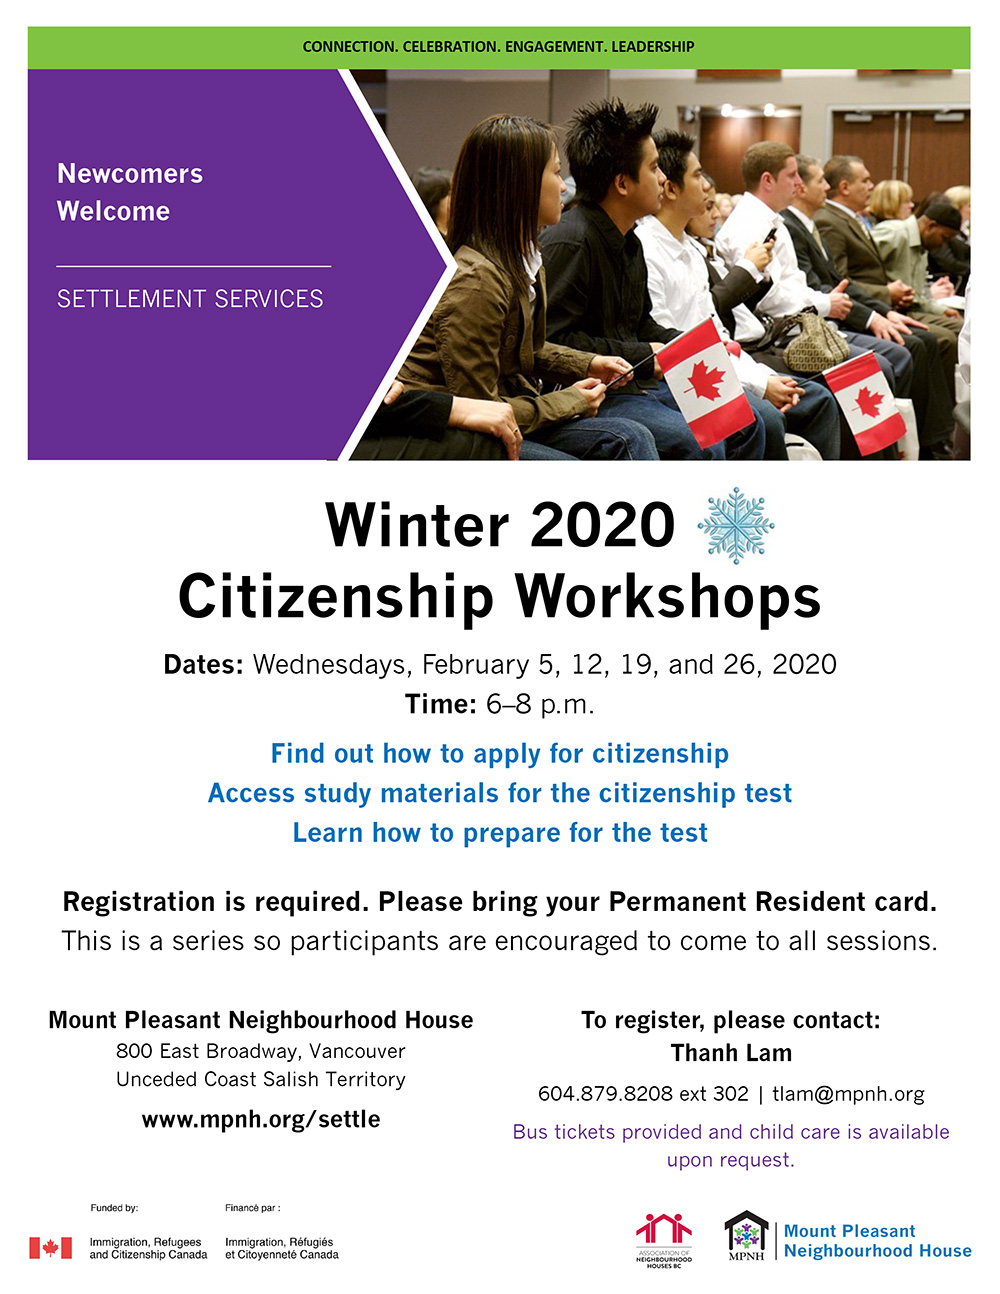 Poster for the Winter 2020 Citizenship Workshops showing a group of new Canadians holding flags